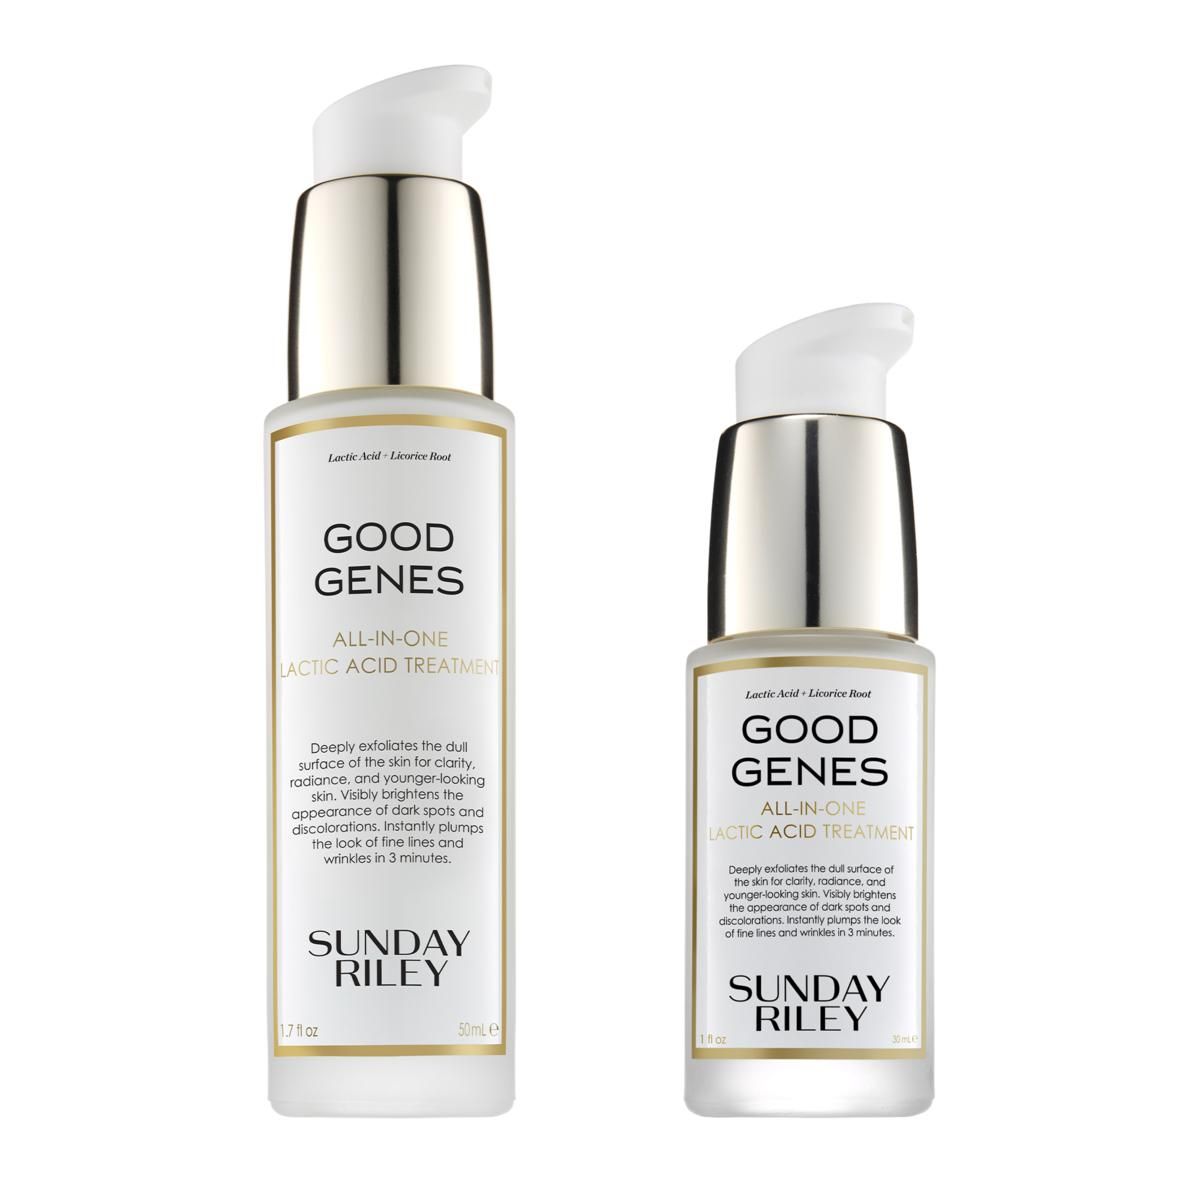 Sunday Riley Good Genes Home and Away Duo - 20839510 | HSN | HSN